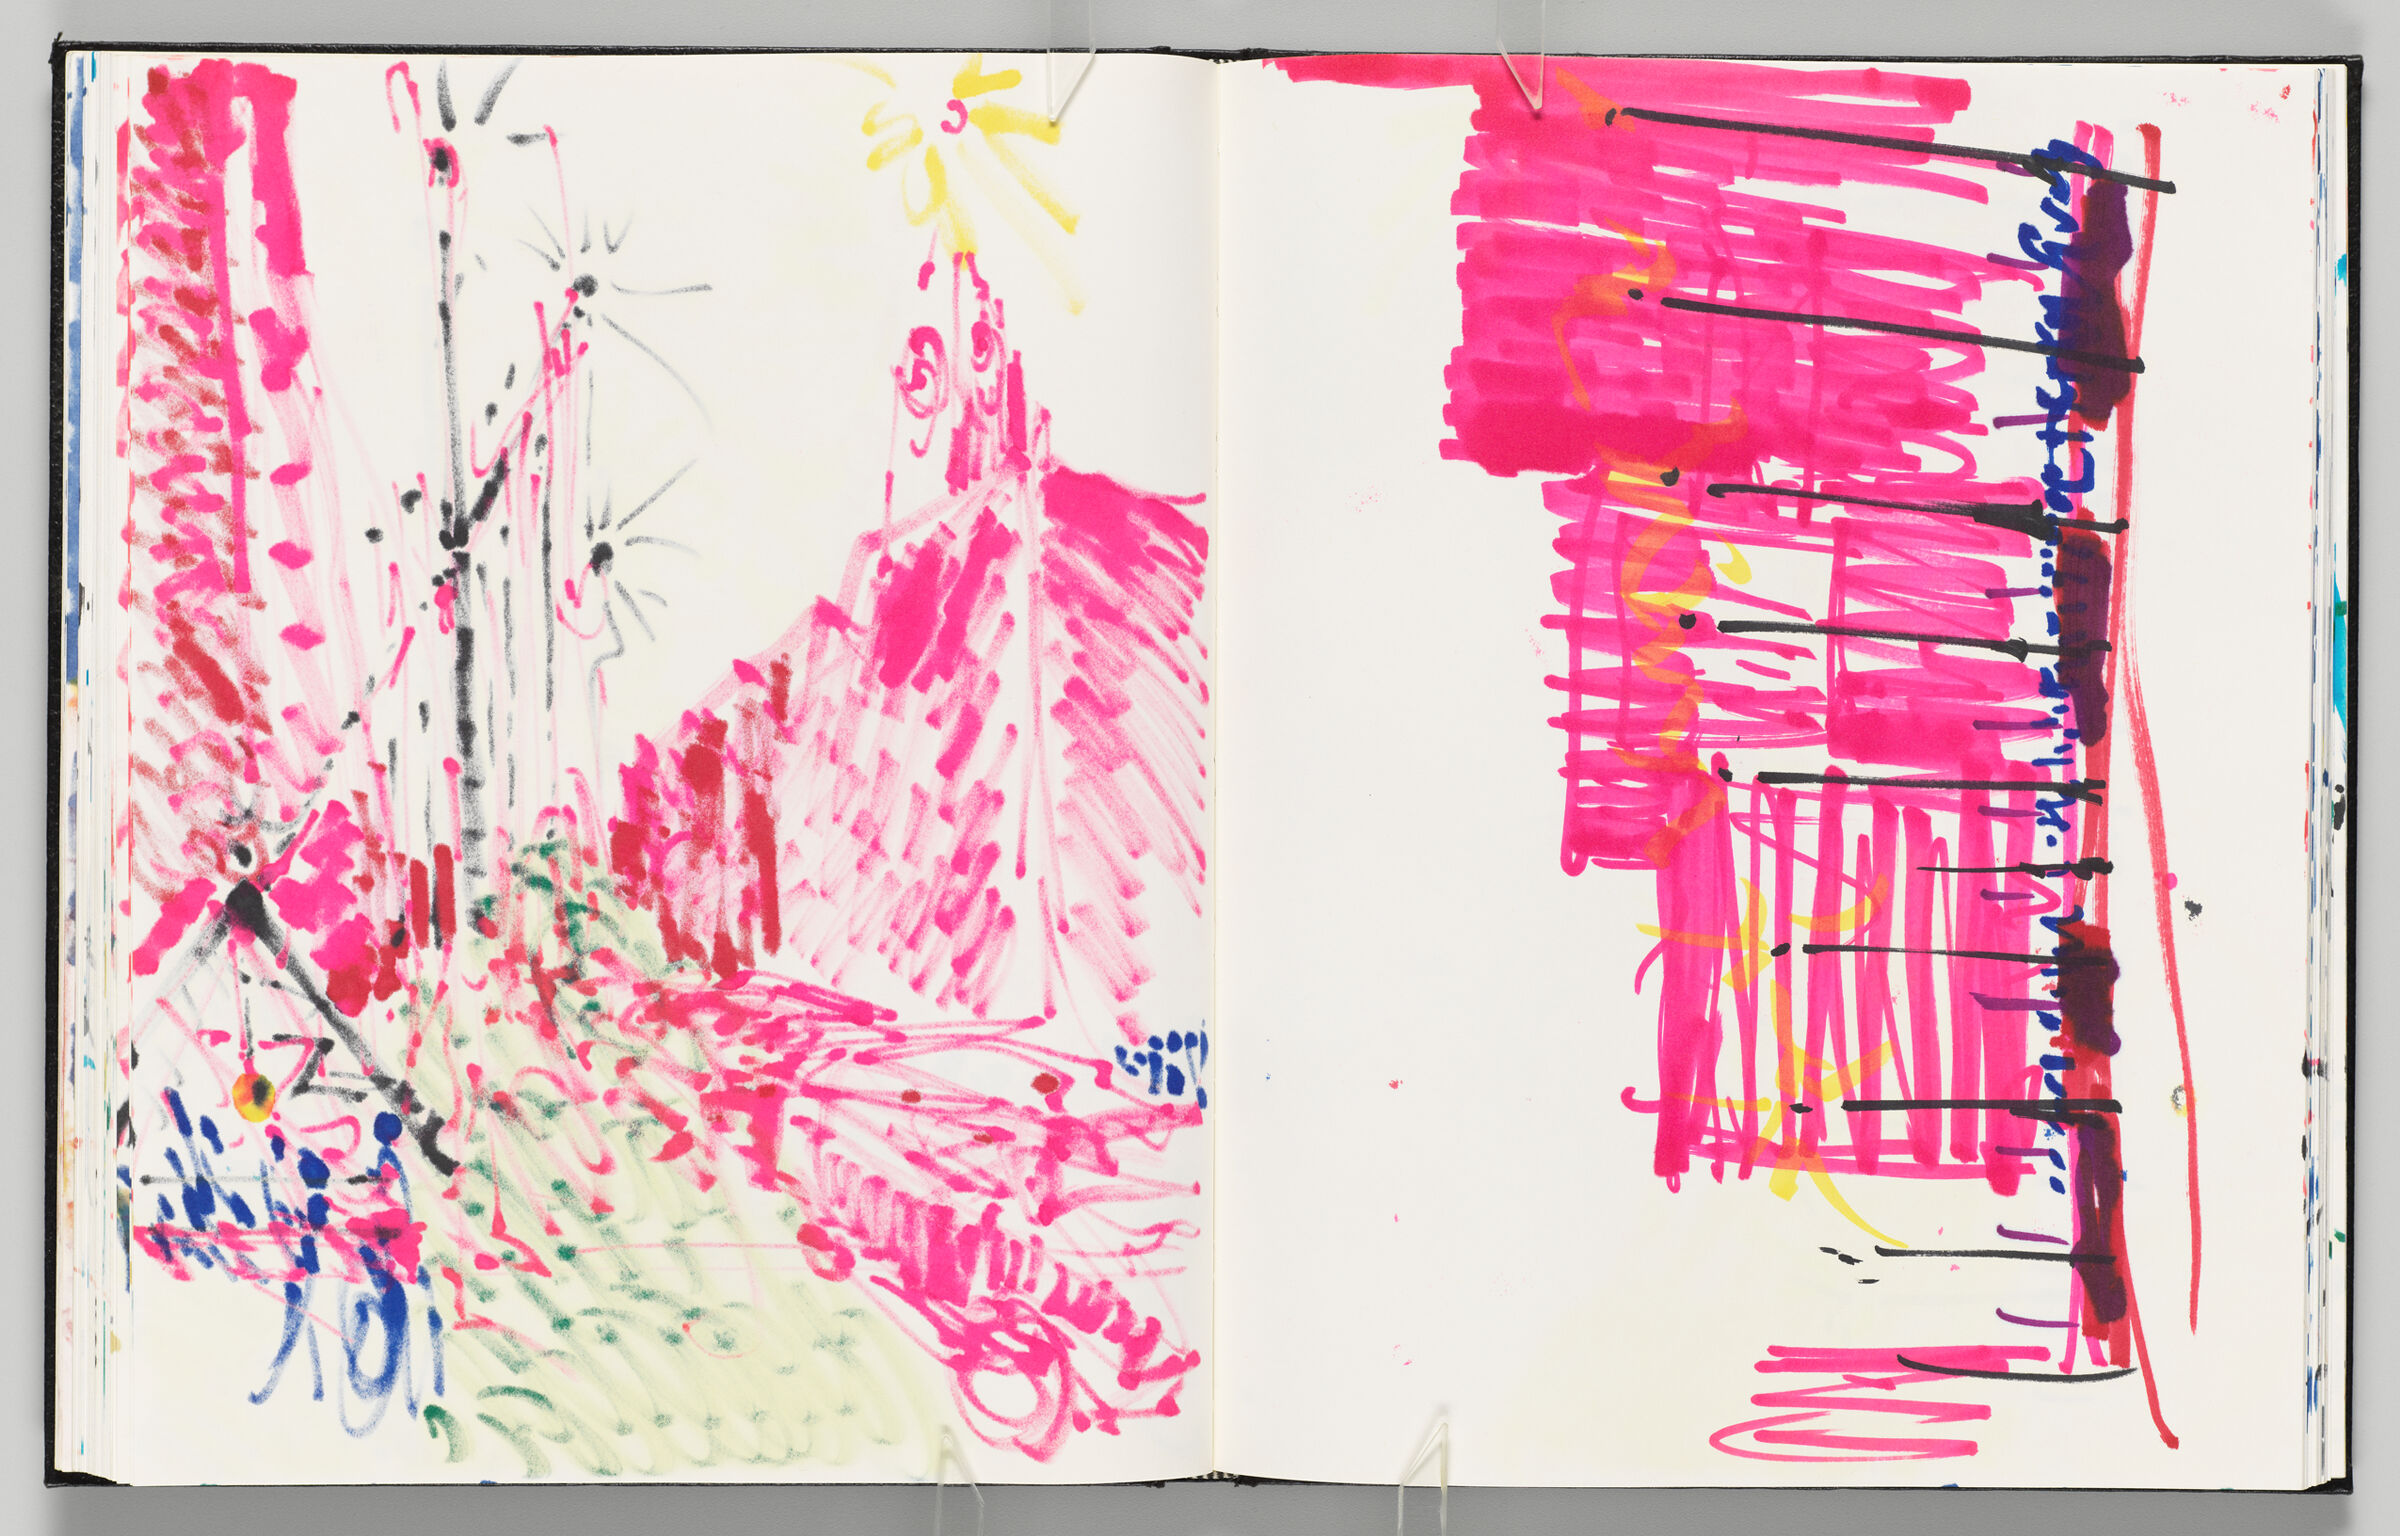 Untitled (Bleed-Through Of Previous Page, Left Page); Untitled (Light Work Design With Figures, Right Page)